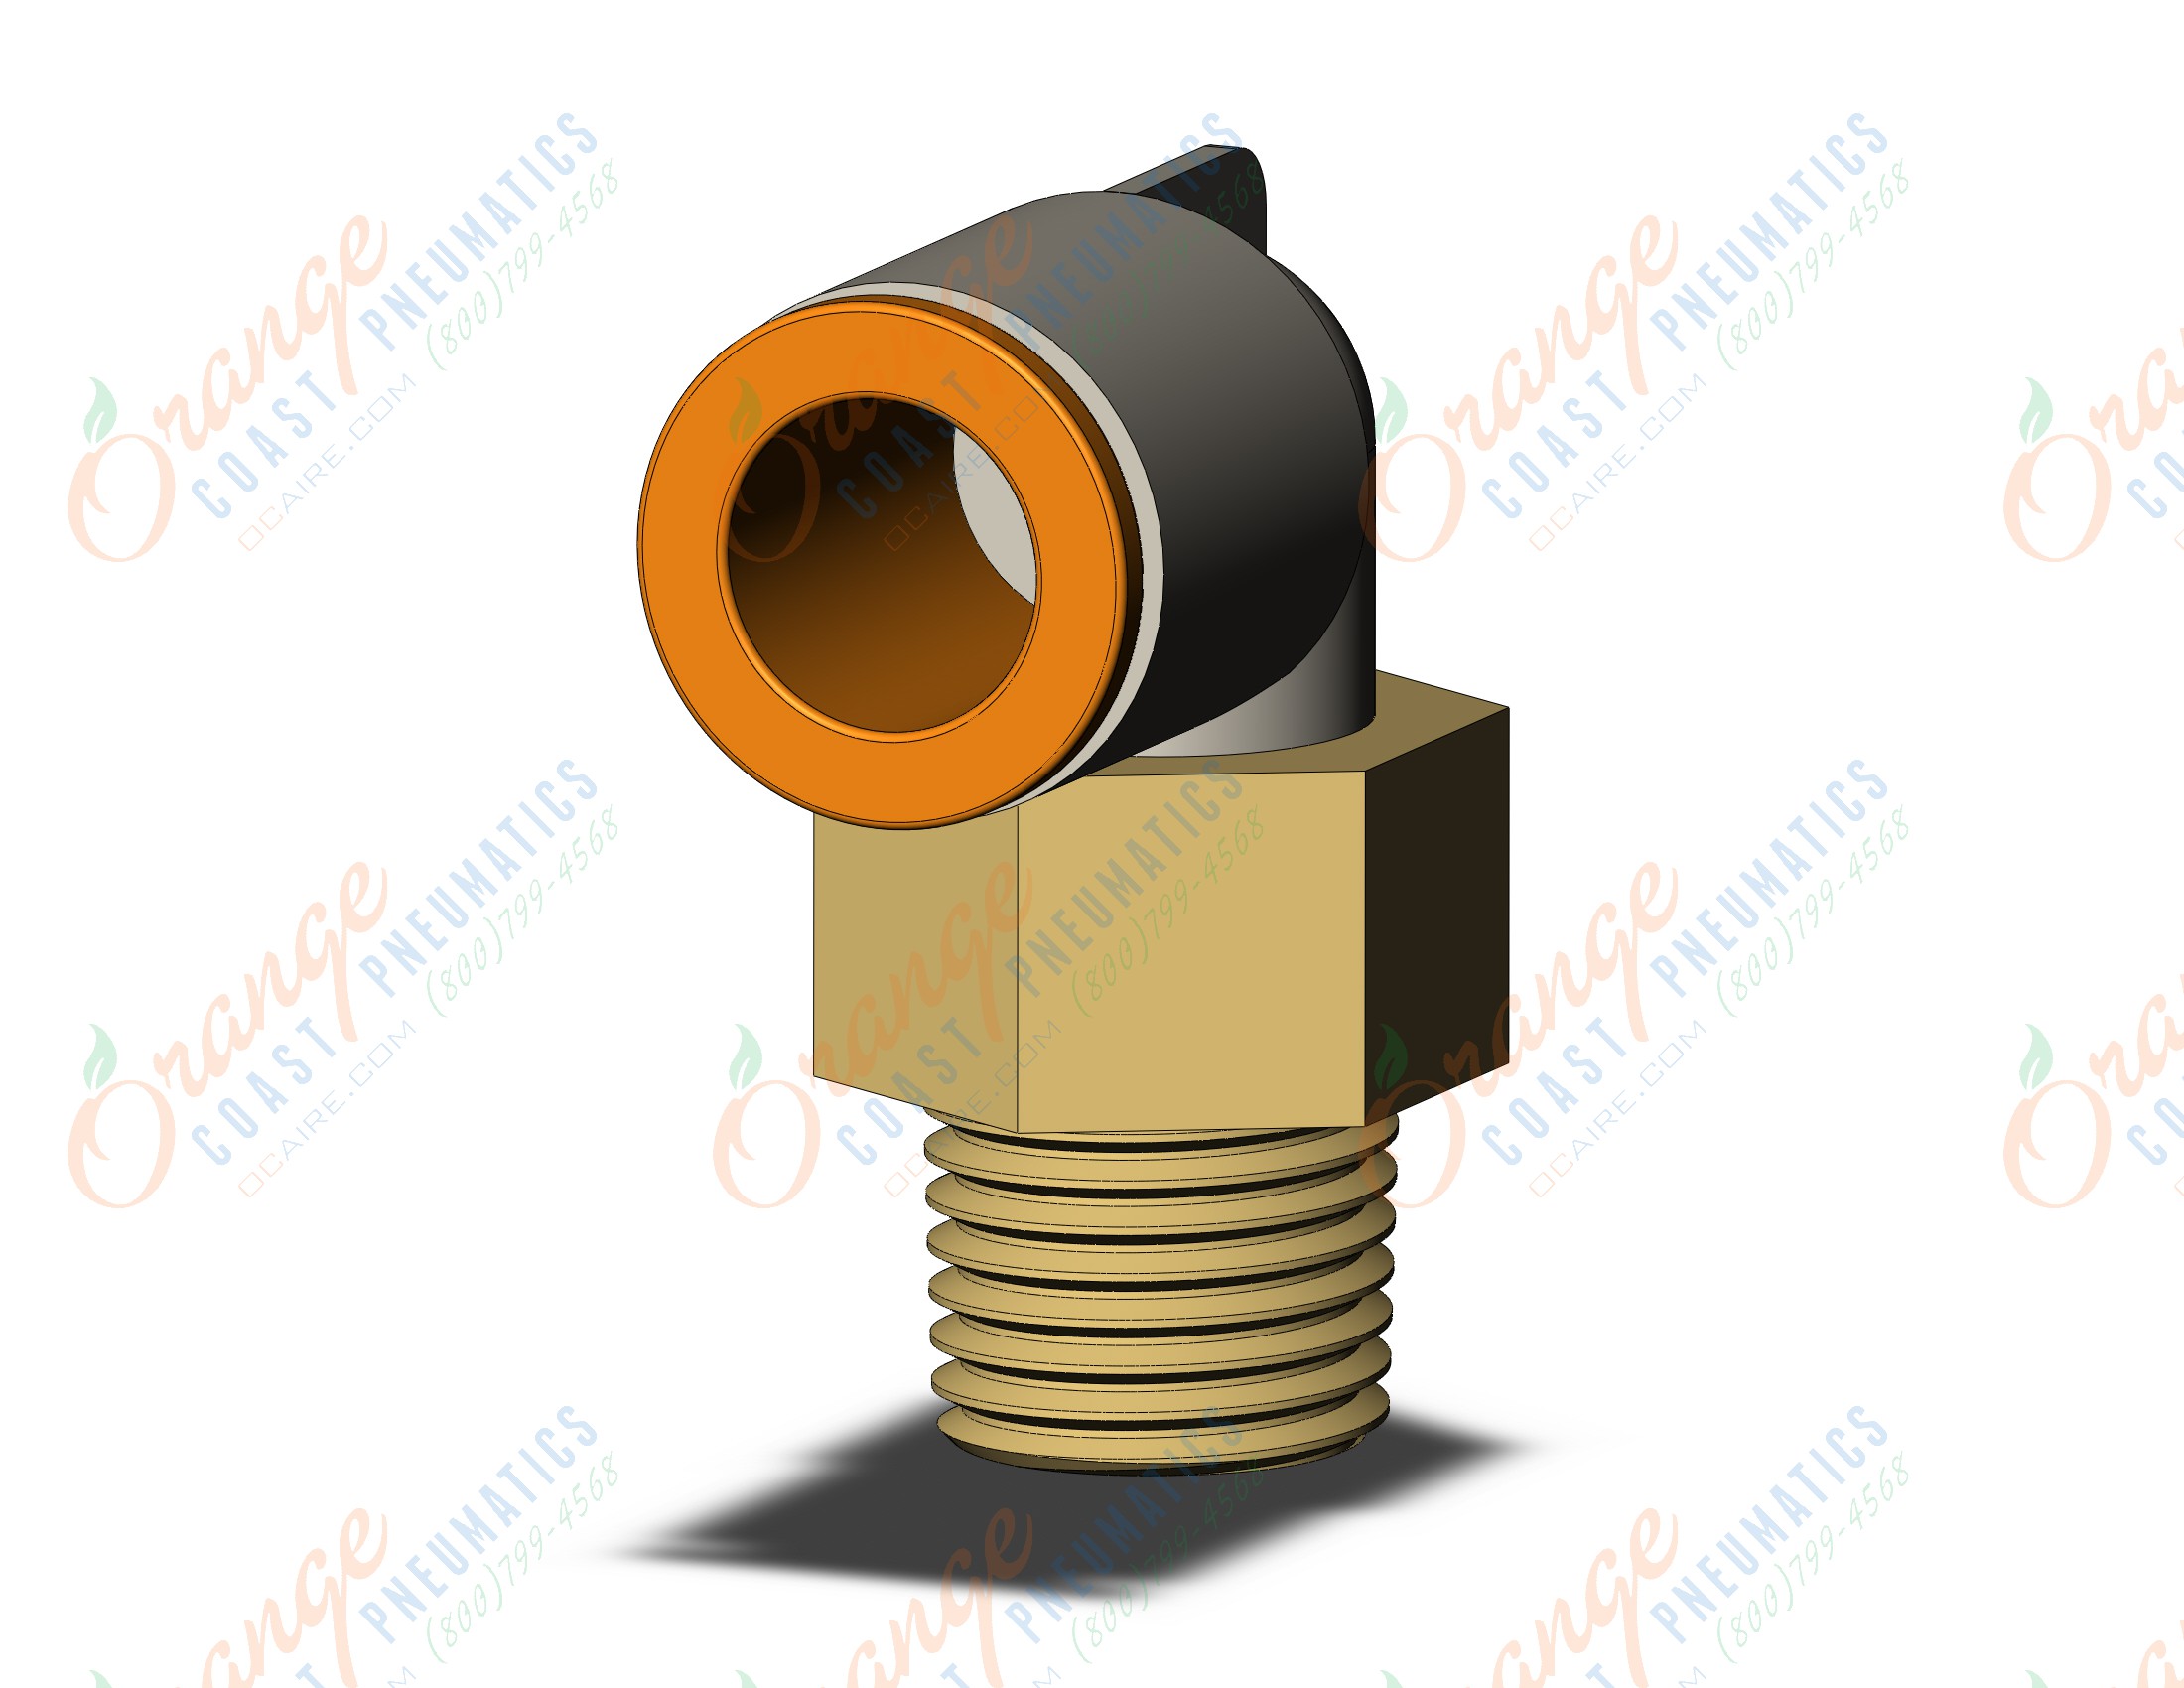 SMC KQ2L11-02A fitting, male elbow, KQ2 FITTING (sold in packages of 10; price is per piece)